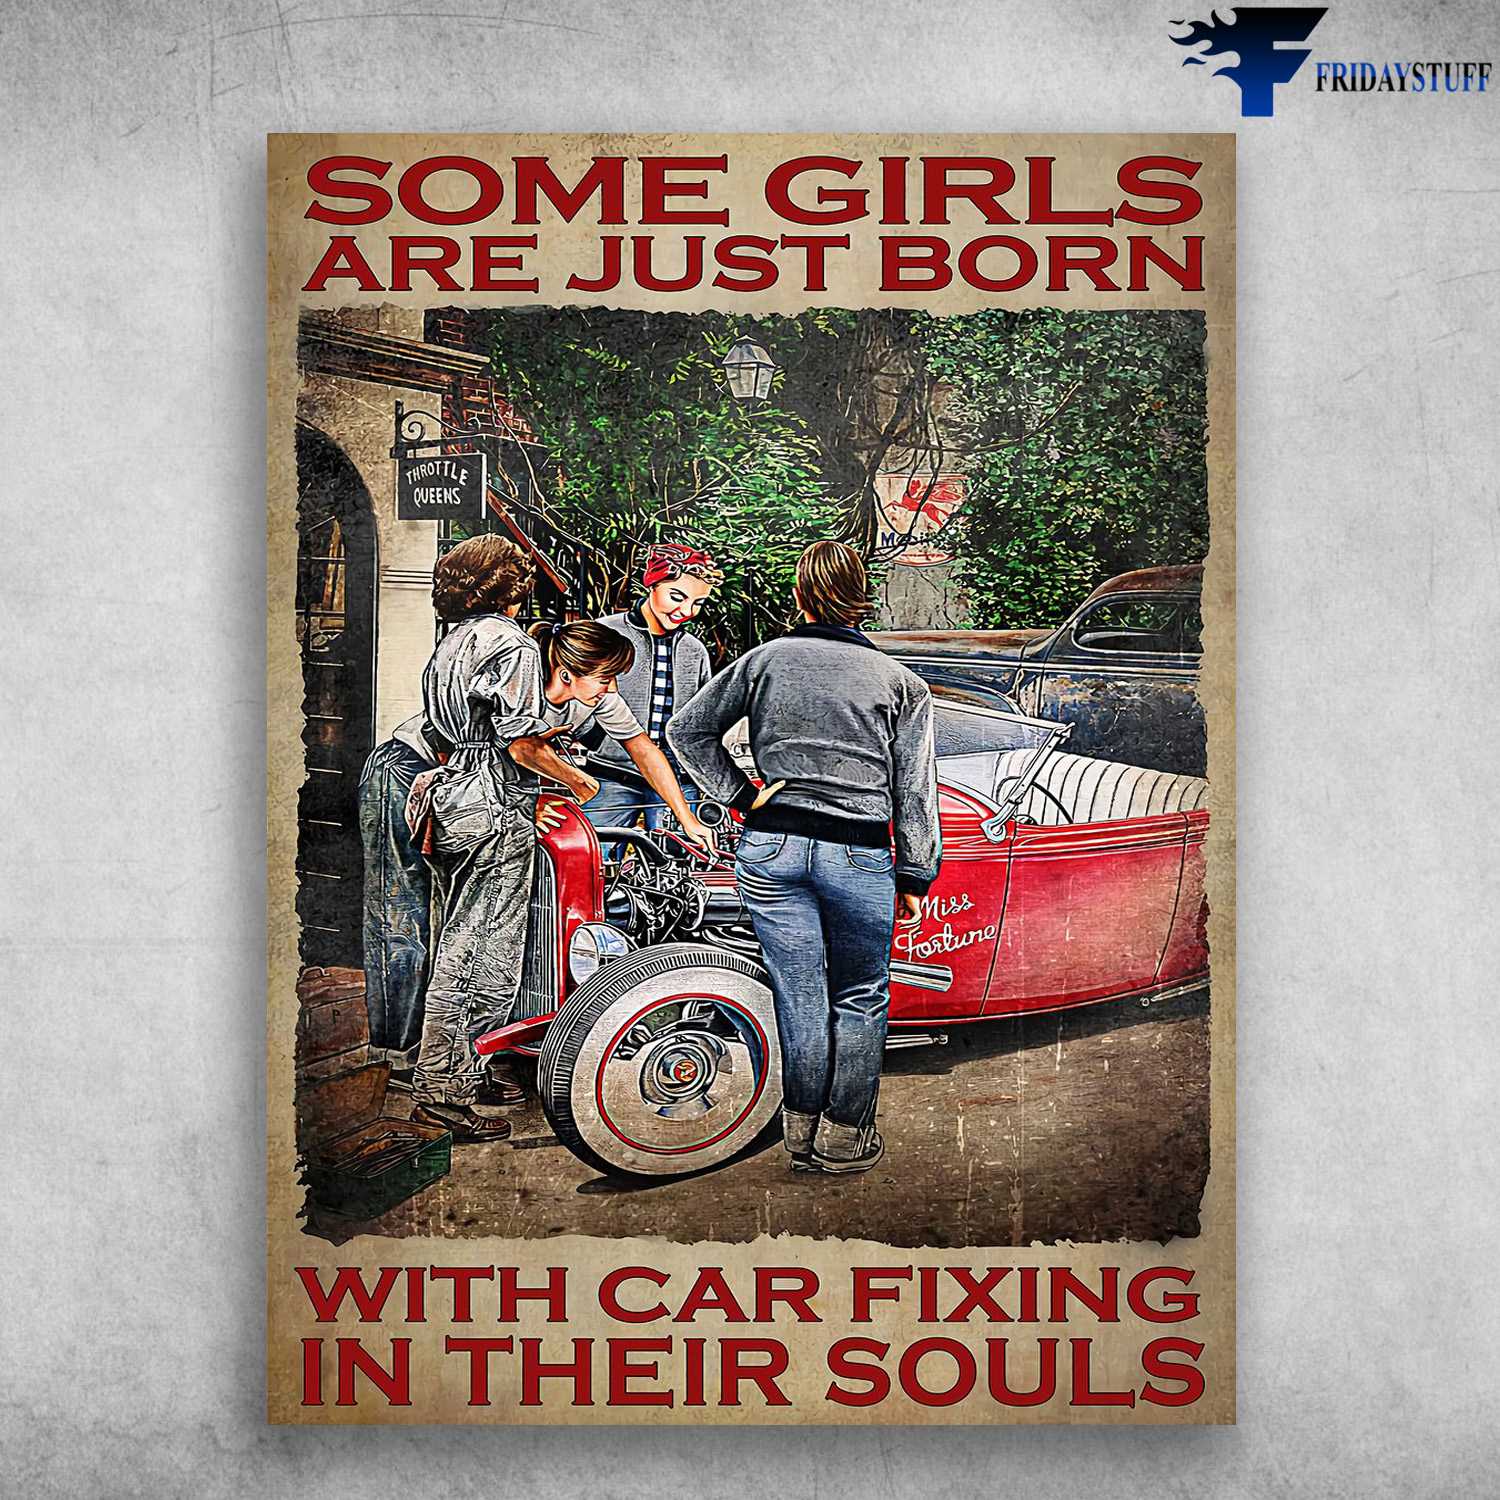 Girl Loves Car, Car Garage - Some Girls Are Just Born, With Car Fixing In Their Souls